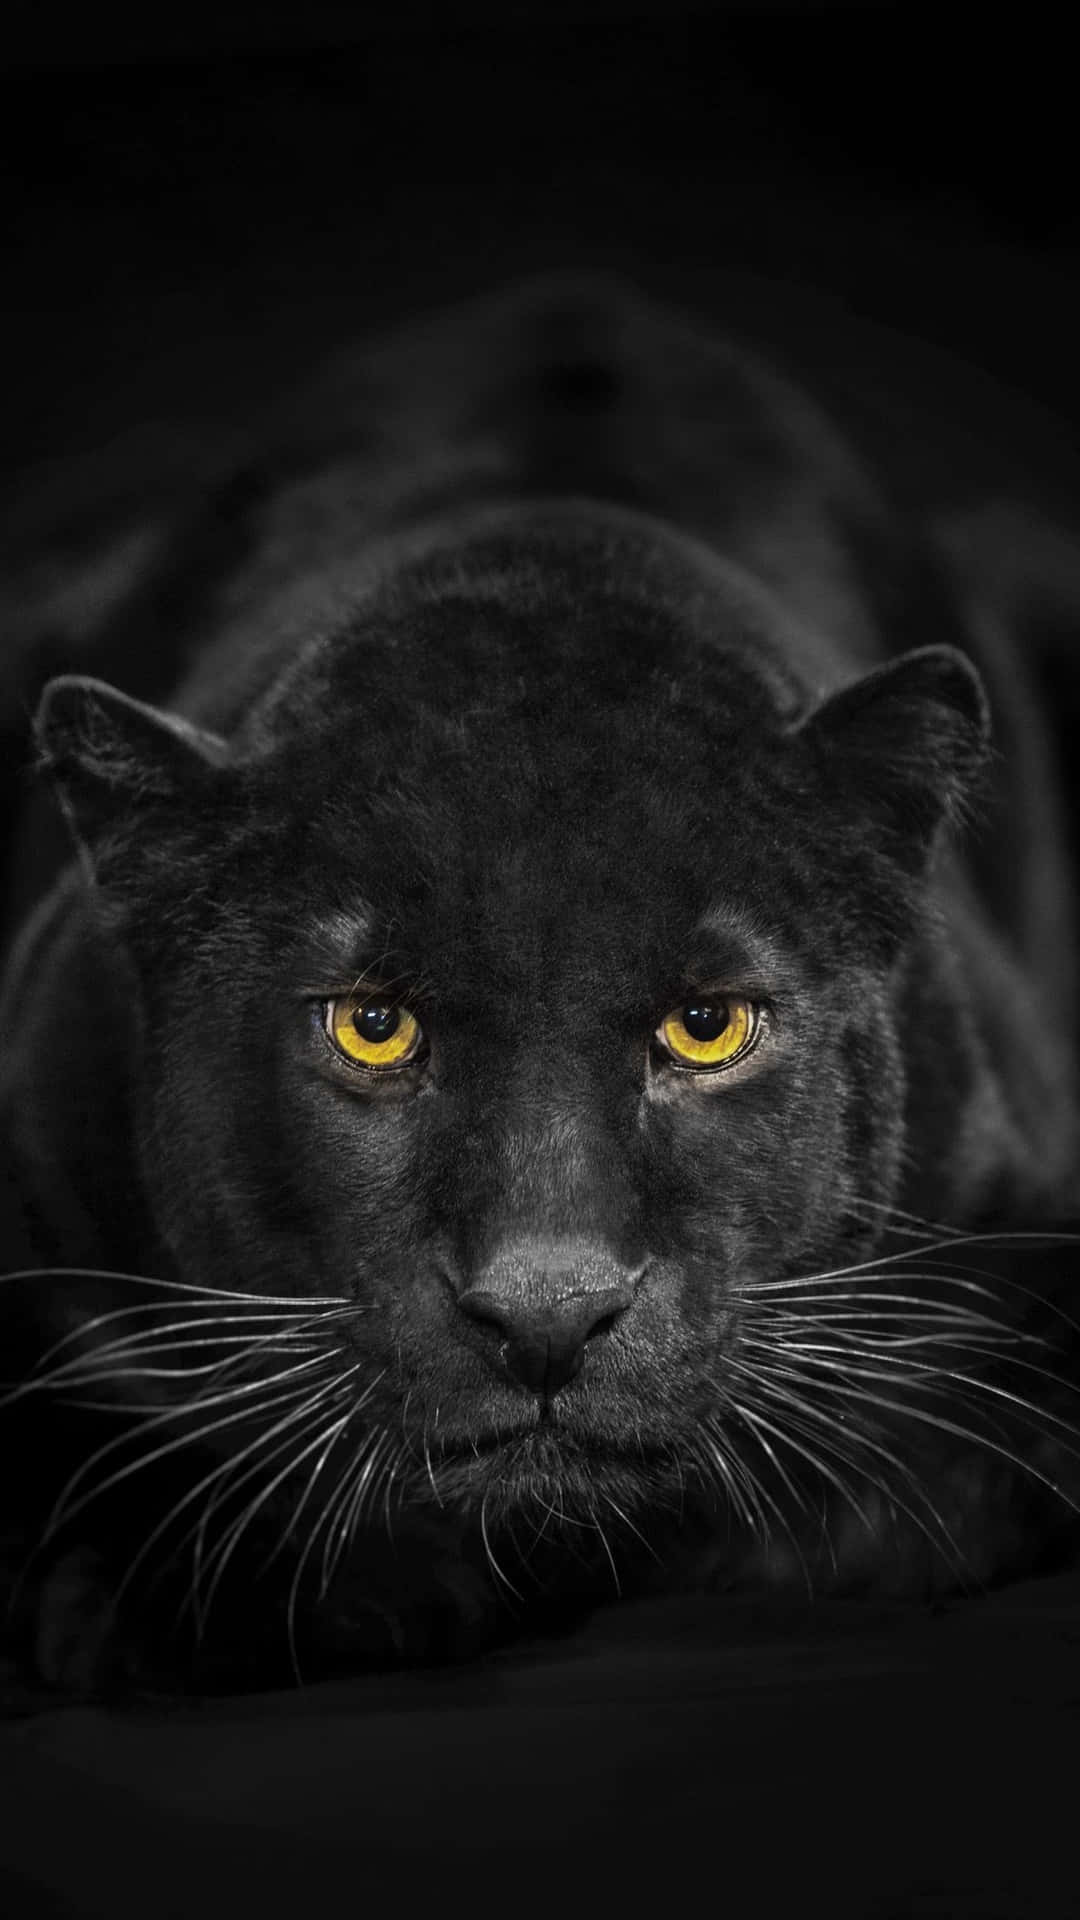 63 MEANINGFUL IPHONE MOBILE WALLPAPERS ARE REPRESE #Animal  #BackgroundsNatural #Black #Color #ip…